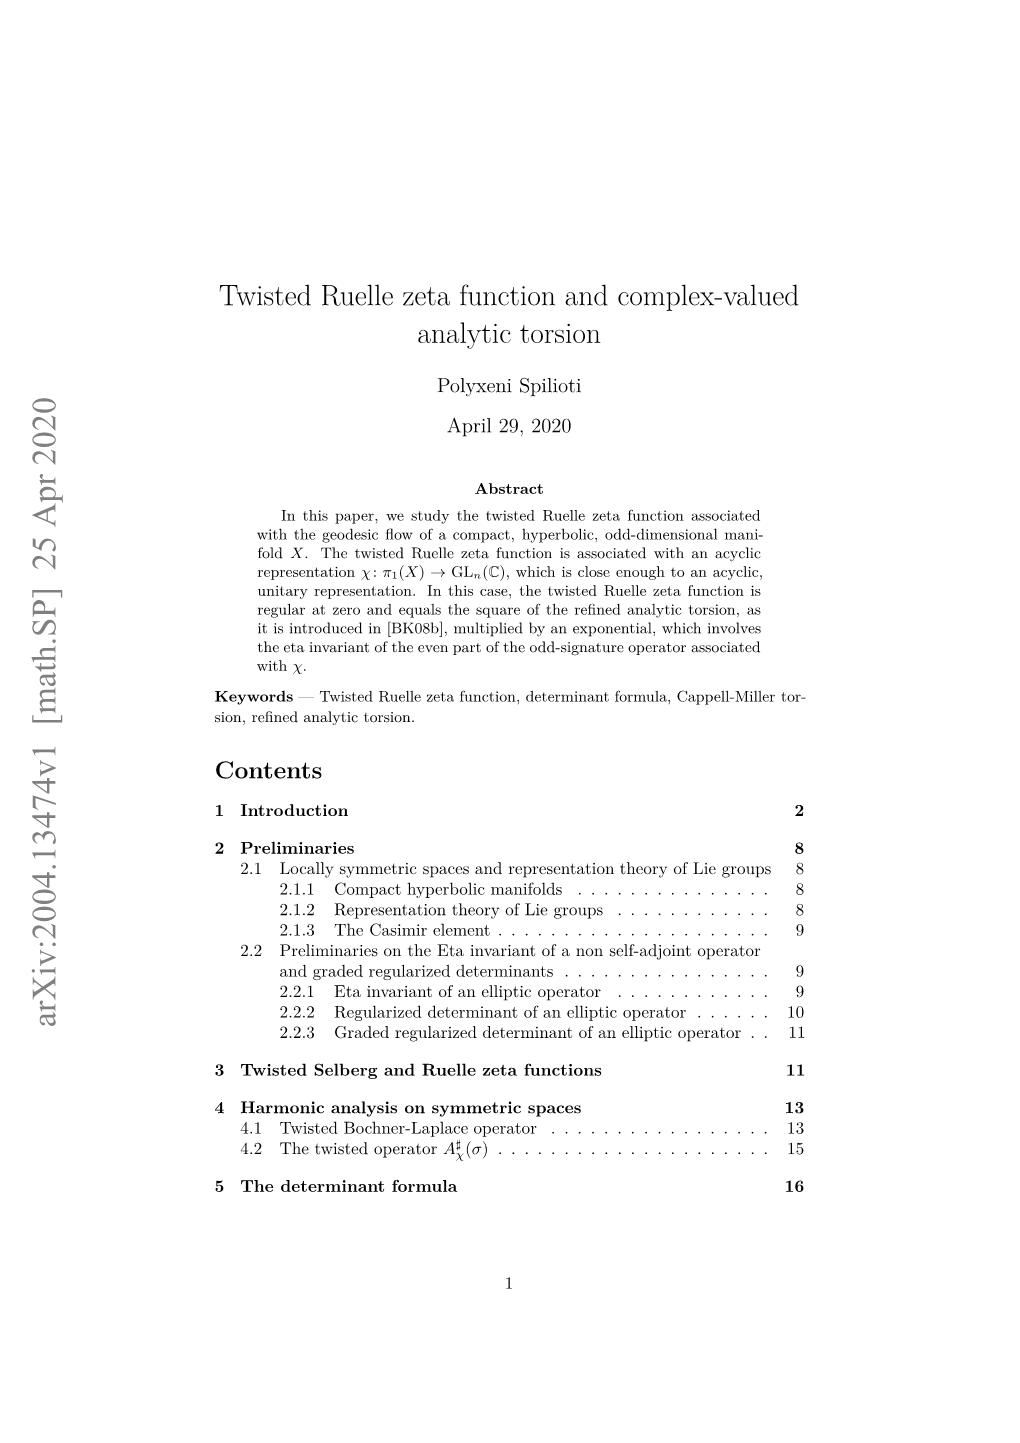 Twisted Ruelle Zeta Function and Complex-Valued Analytic Torsion